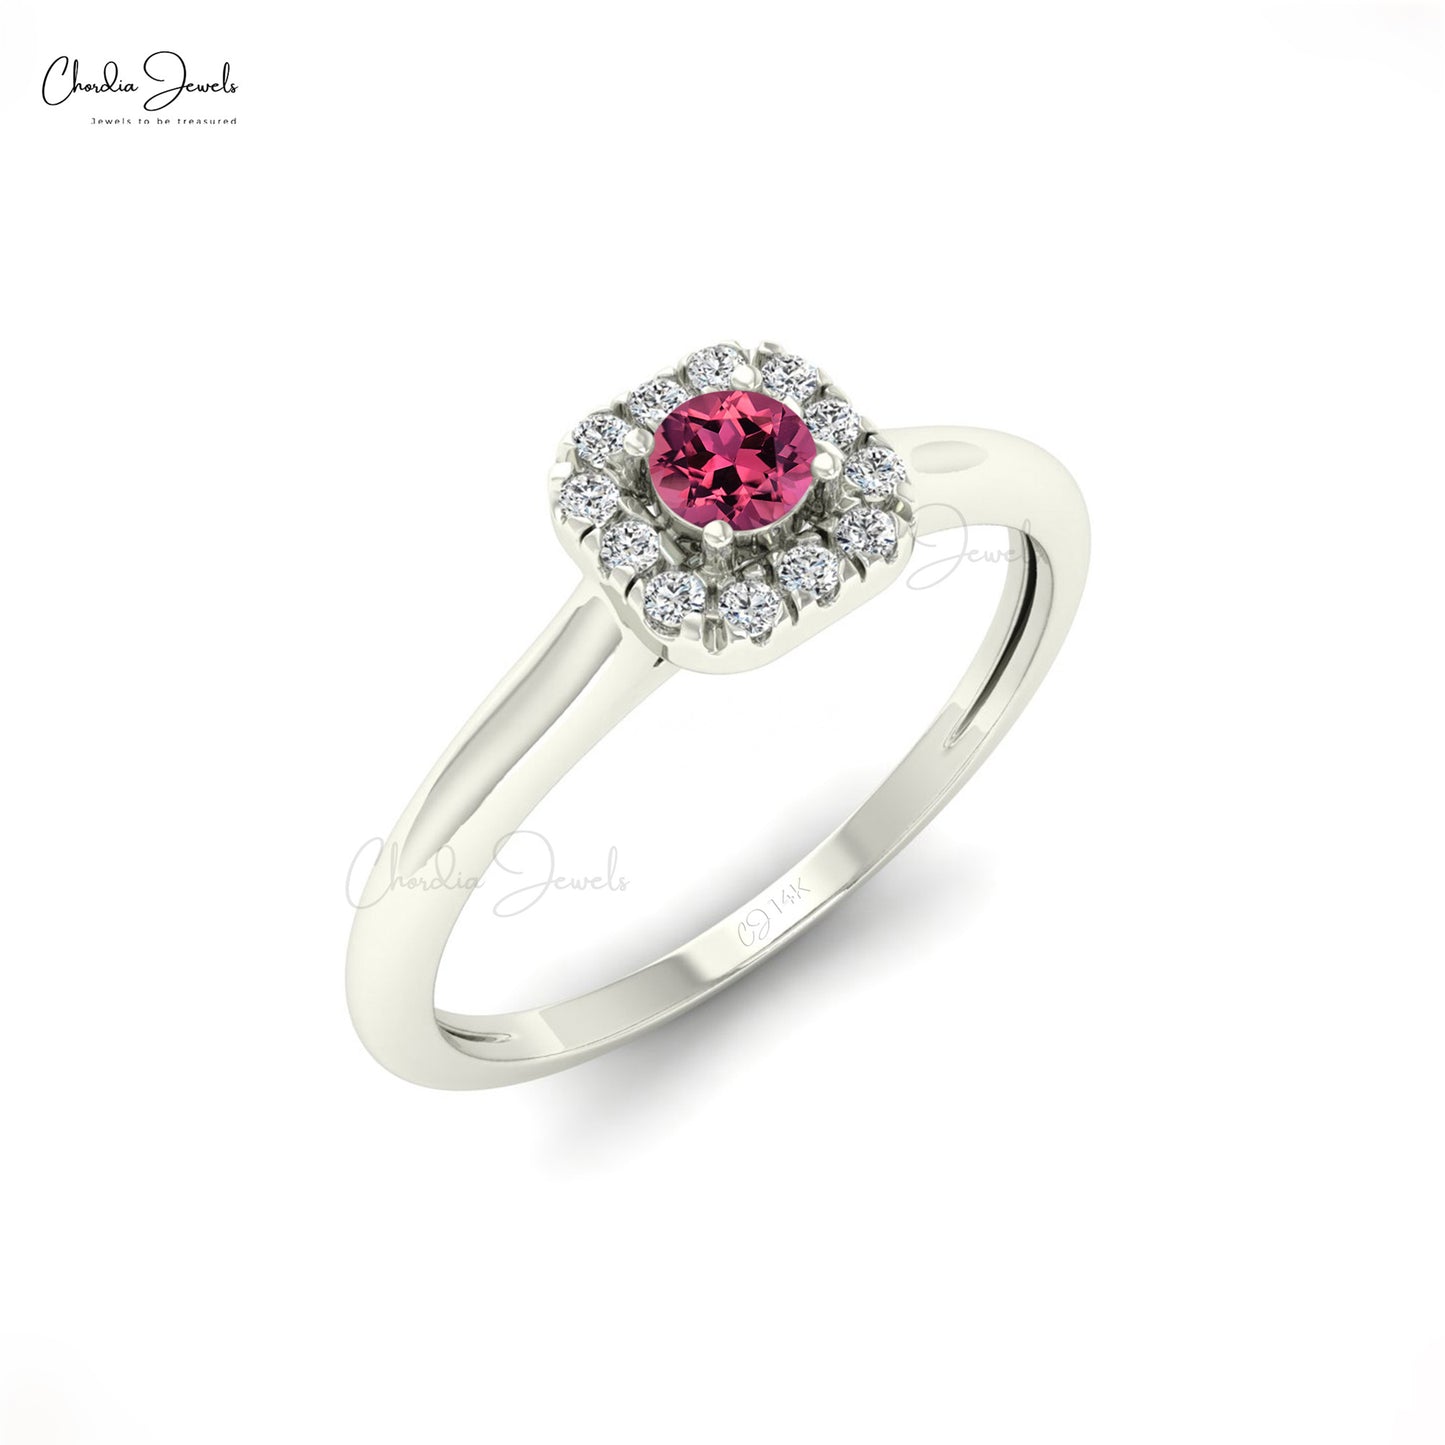 Natural 3mm Round Cut Pink Tourmaline Dainty Ring For Her, 14k Solid Gold Sharing Prong Gemstone Halo Ring For Anniversary